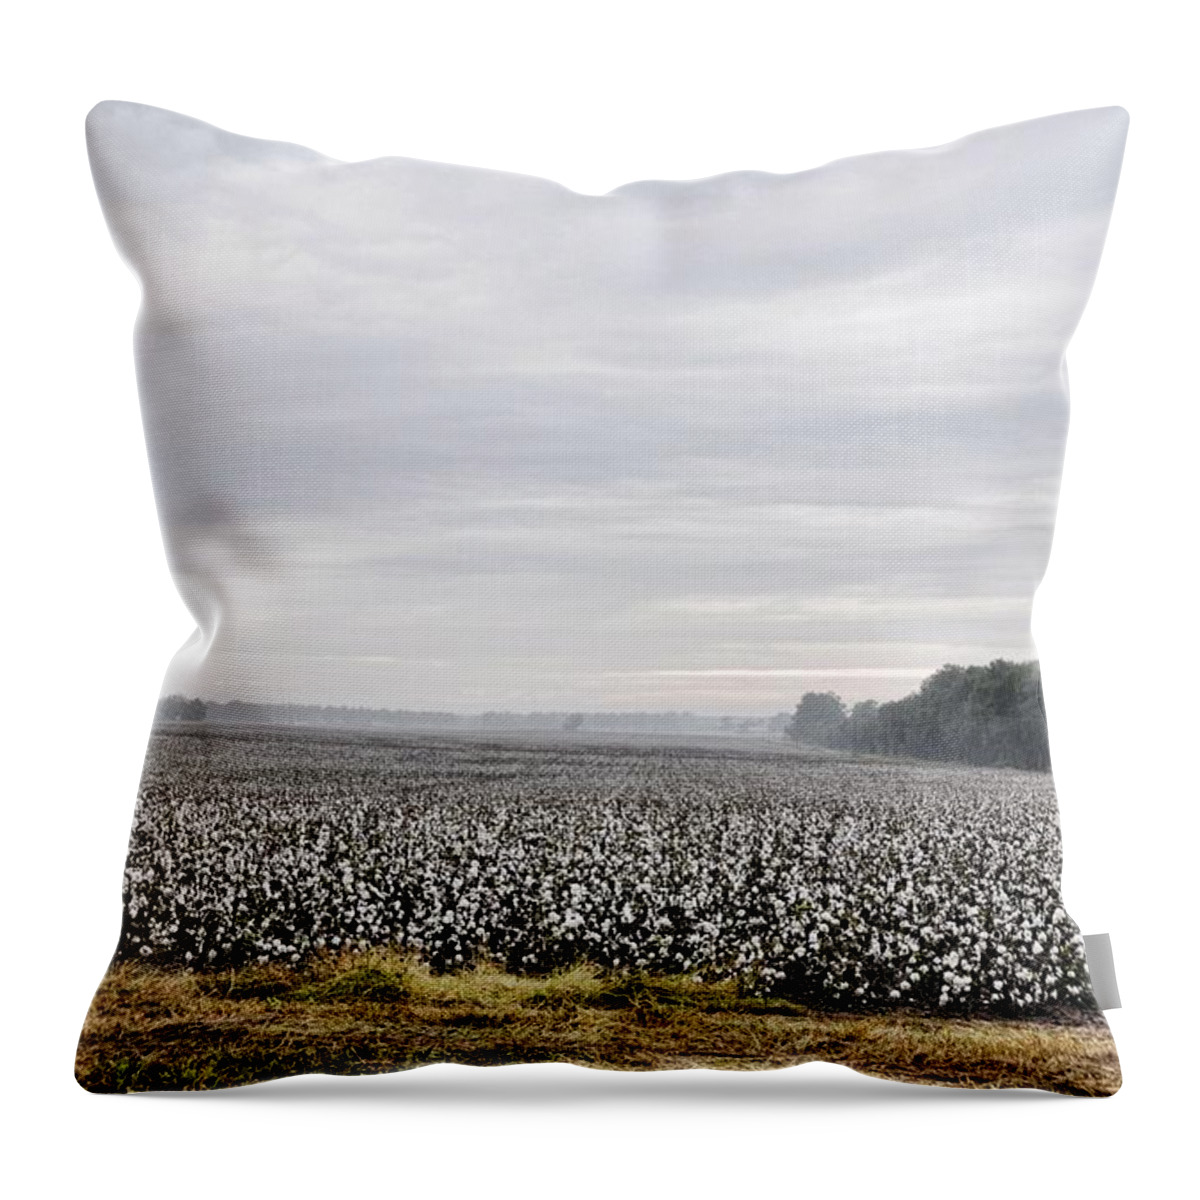 Landscapes Throw Pillow featuring the photograph Cotton Under The Mist by Jan Amiss Photography